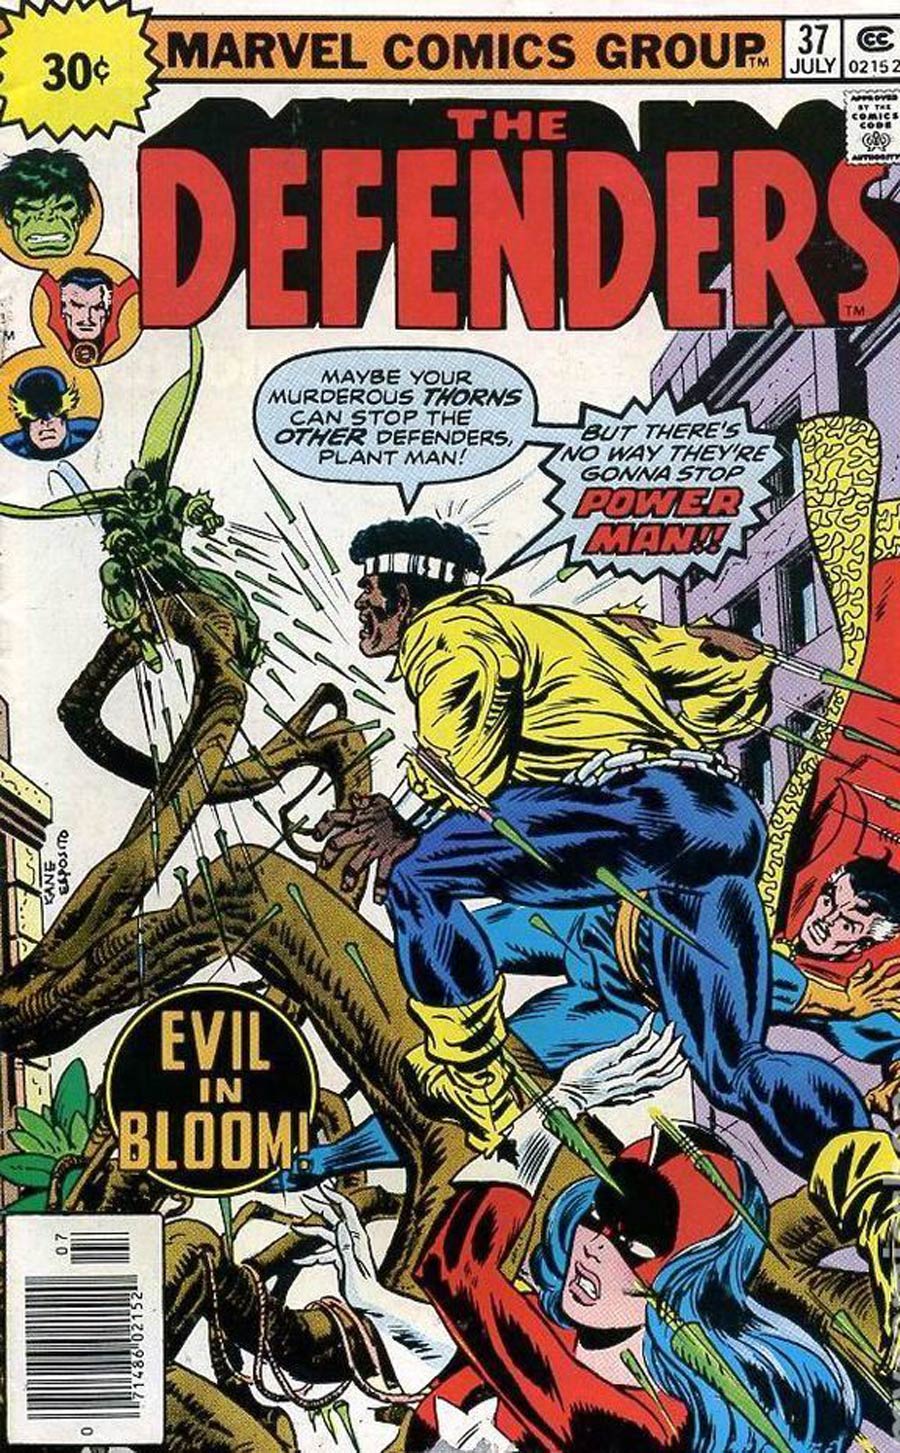 Defenders #37 Cover B 30-Cent Variant Edition